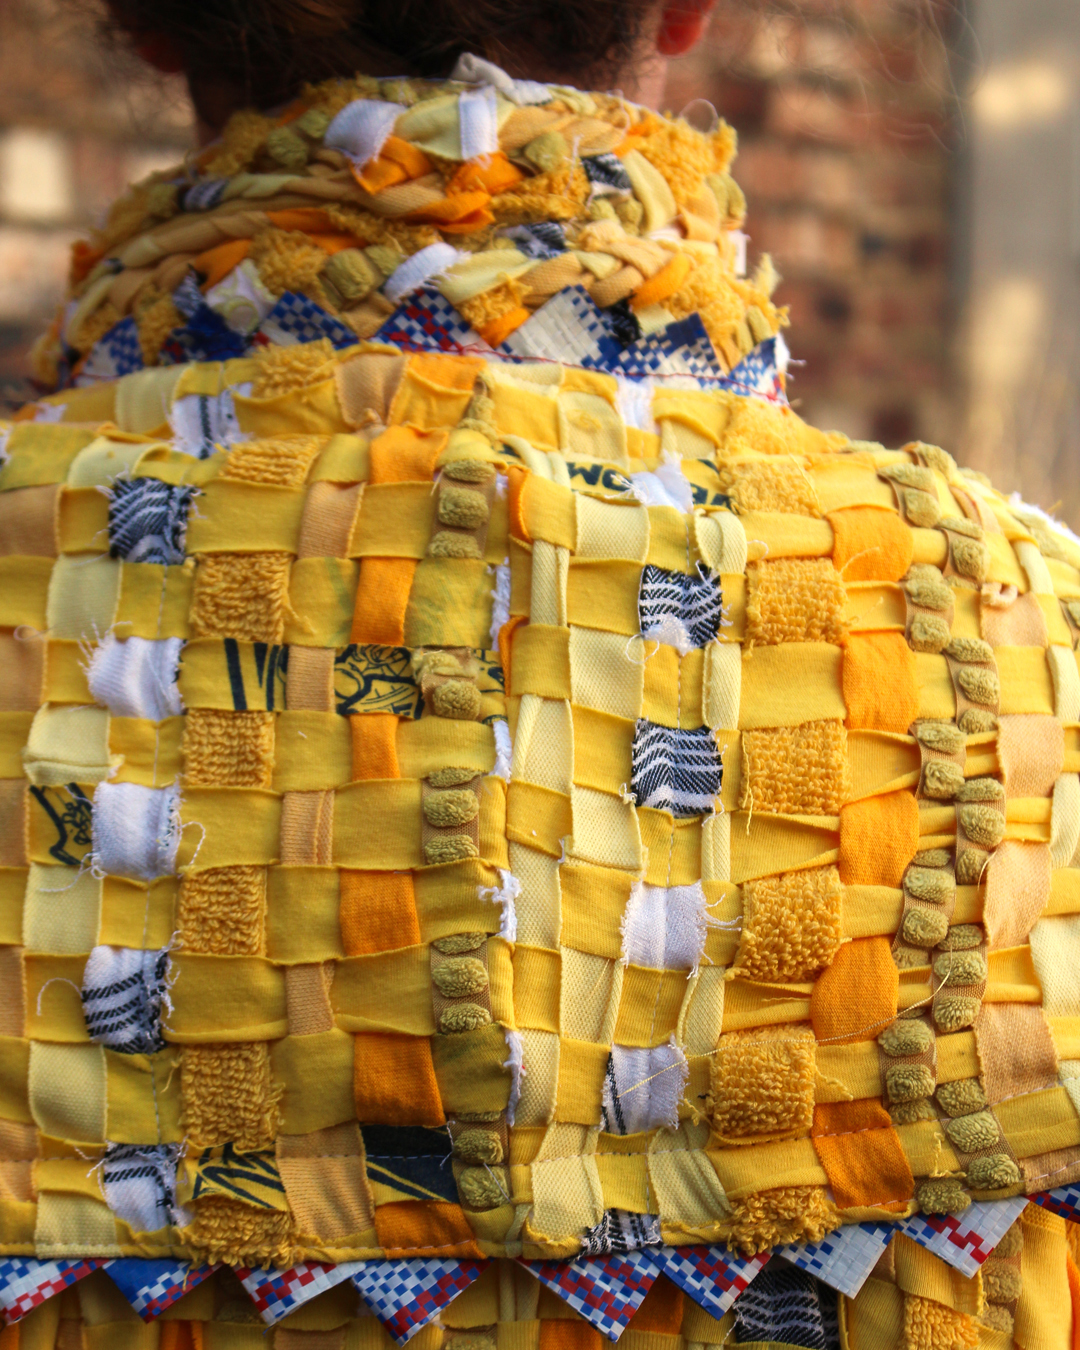 A close up photo of the back of the character, showing the woven rags and the zig-zag trim, as well as the standing collar.